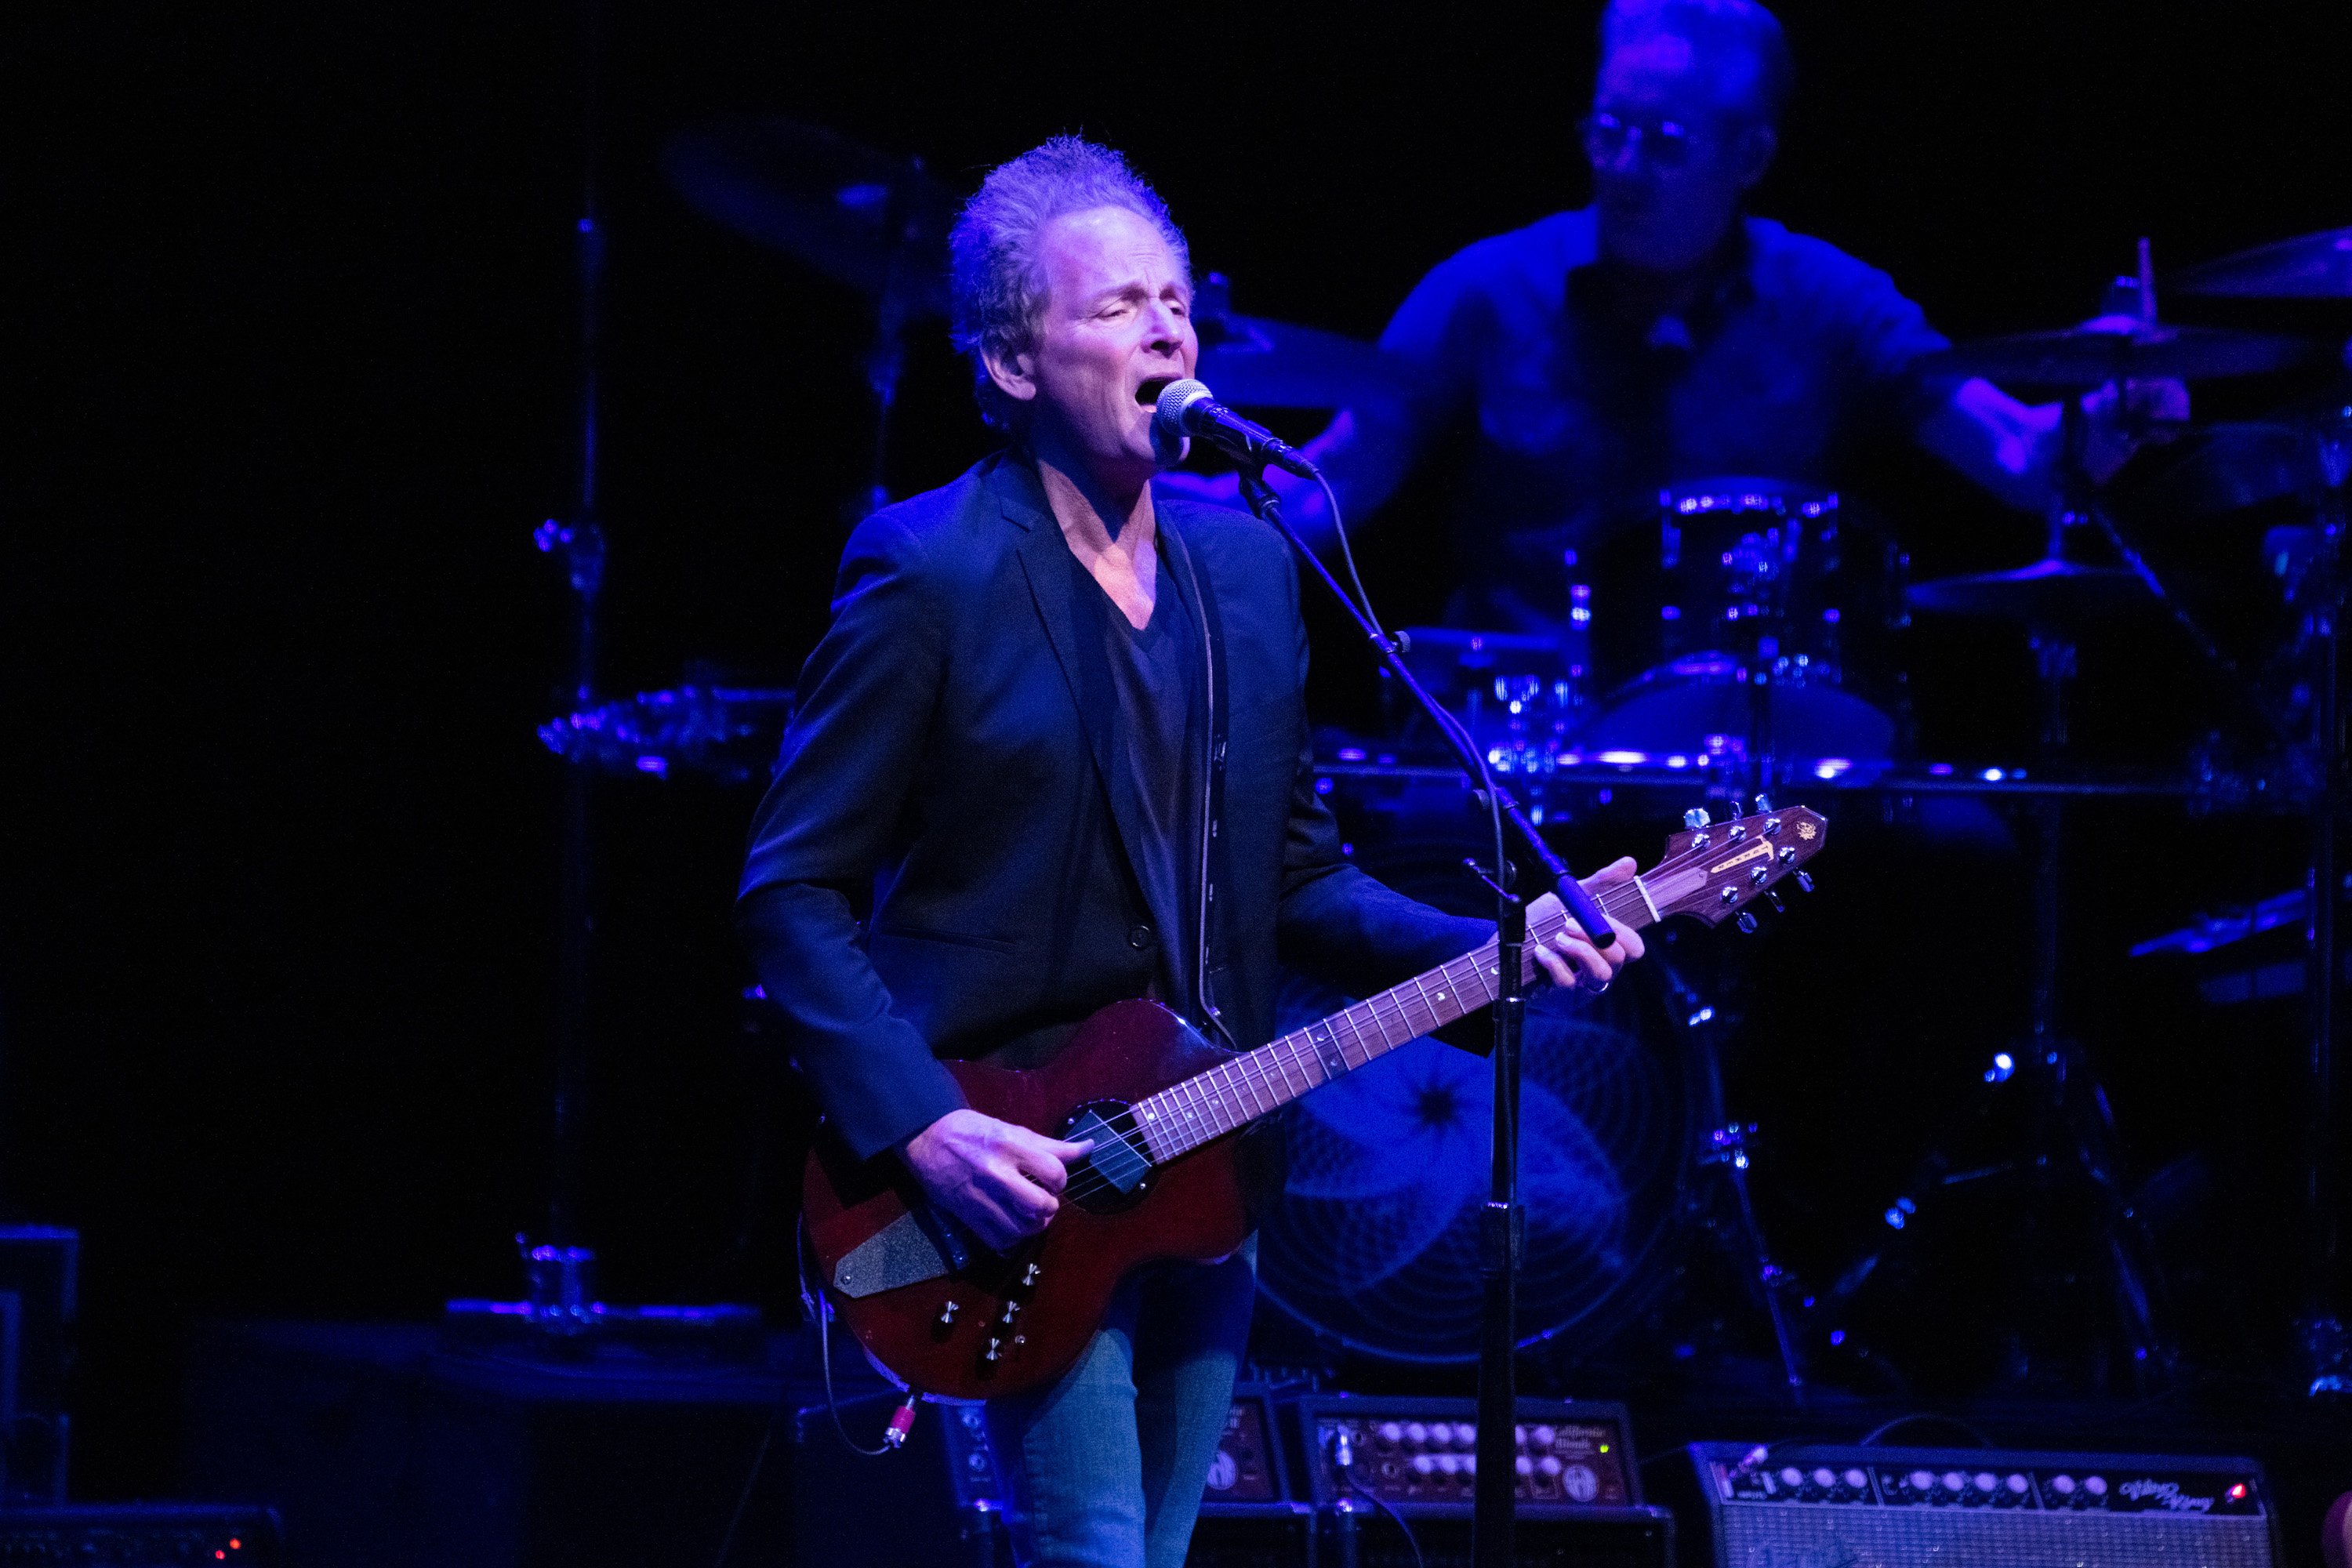 Musician Lindsey Buckingham of Fleetwood Mac performs on stage